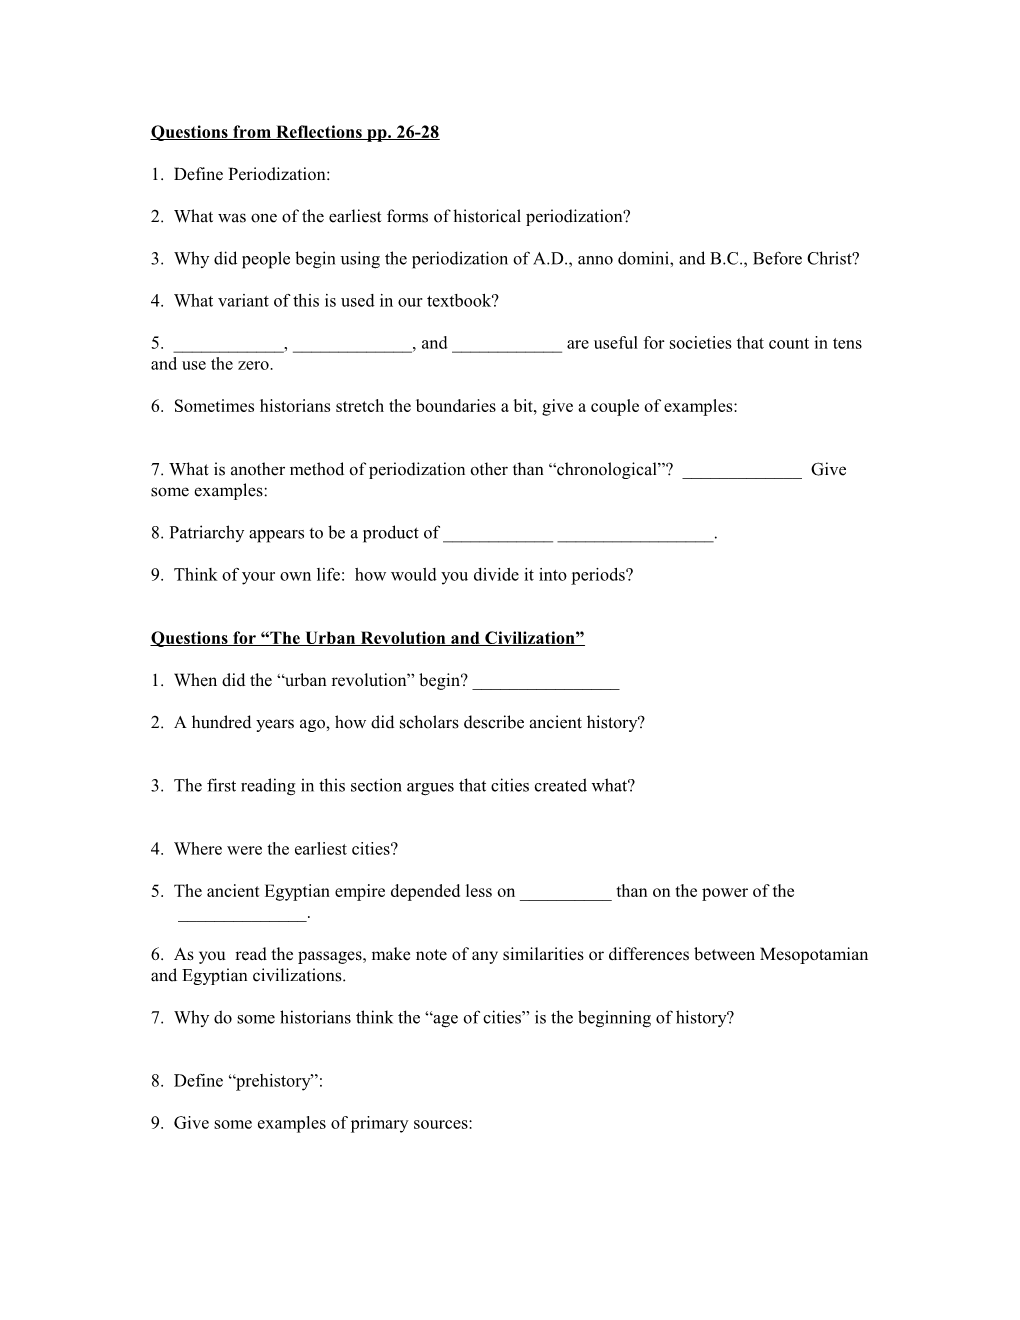 Questions from Reflections Pp. 26-28